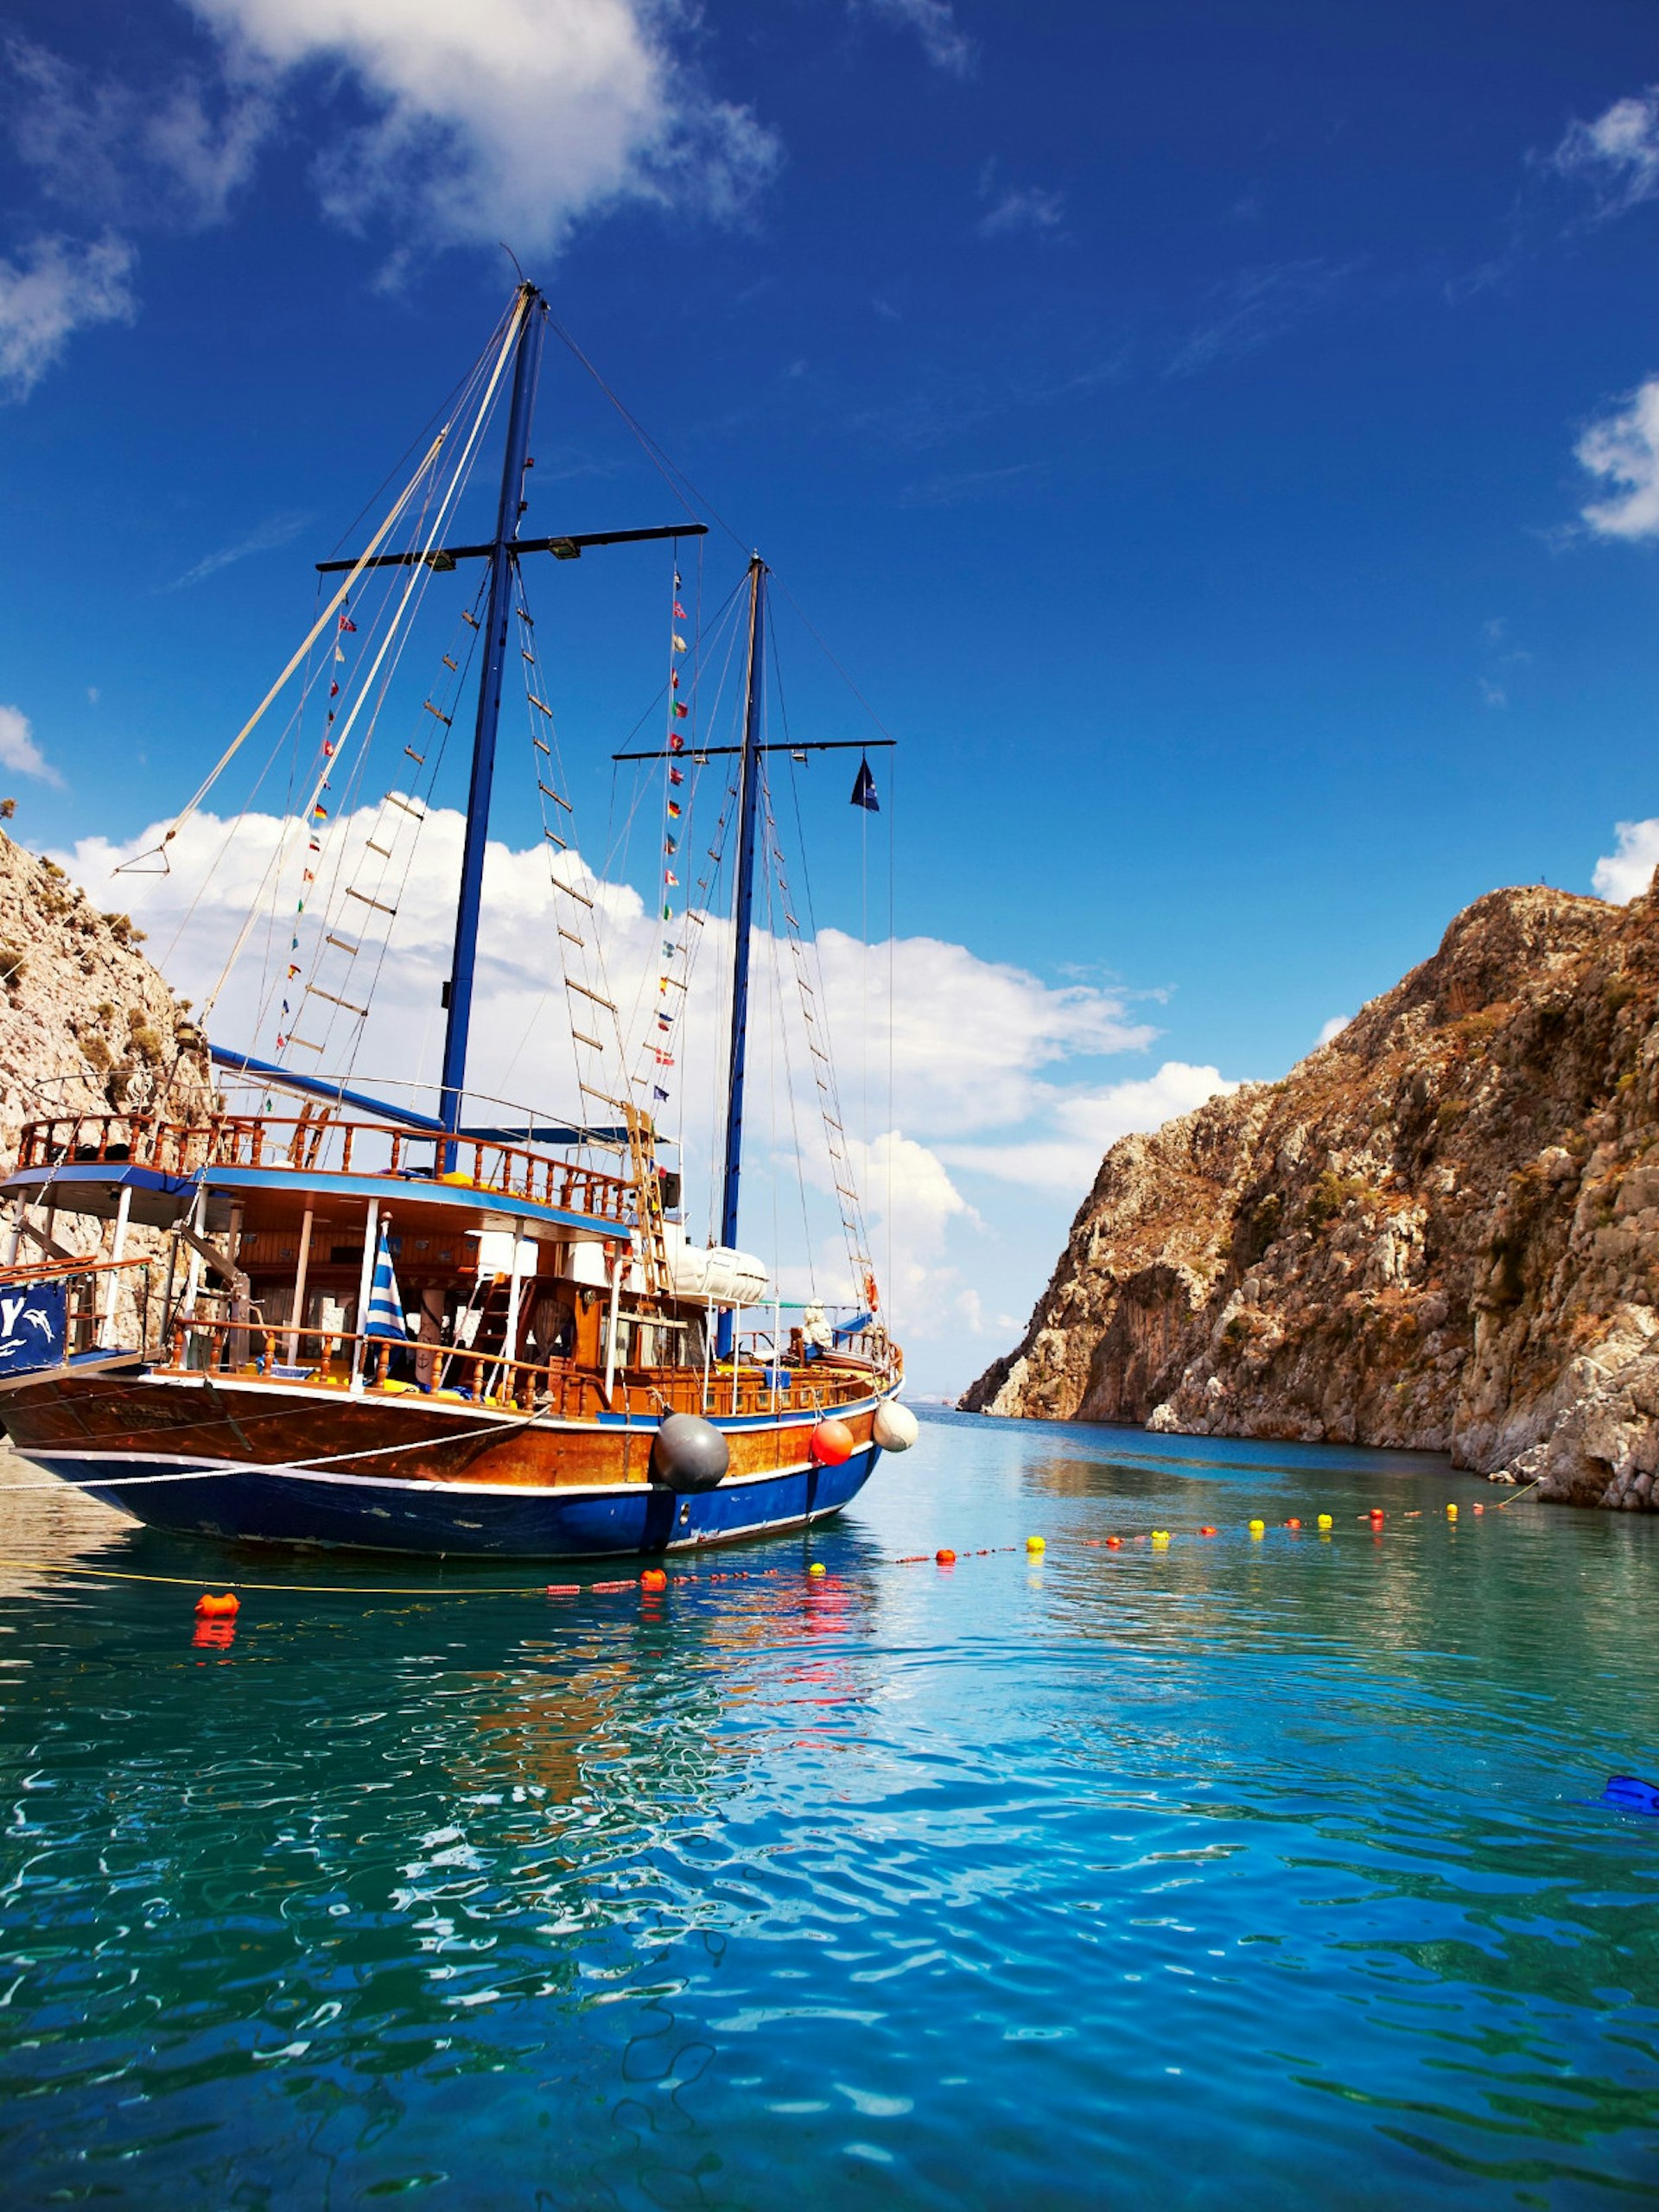 Yacht moored in a secluded cove on Kalymnos island, Greece